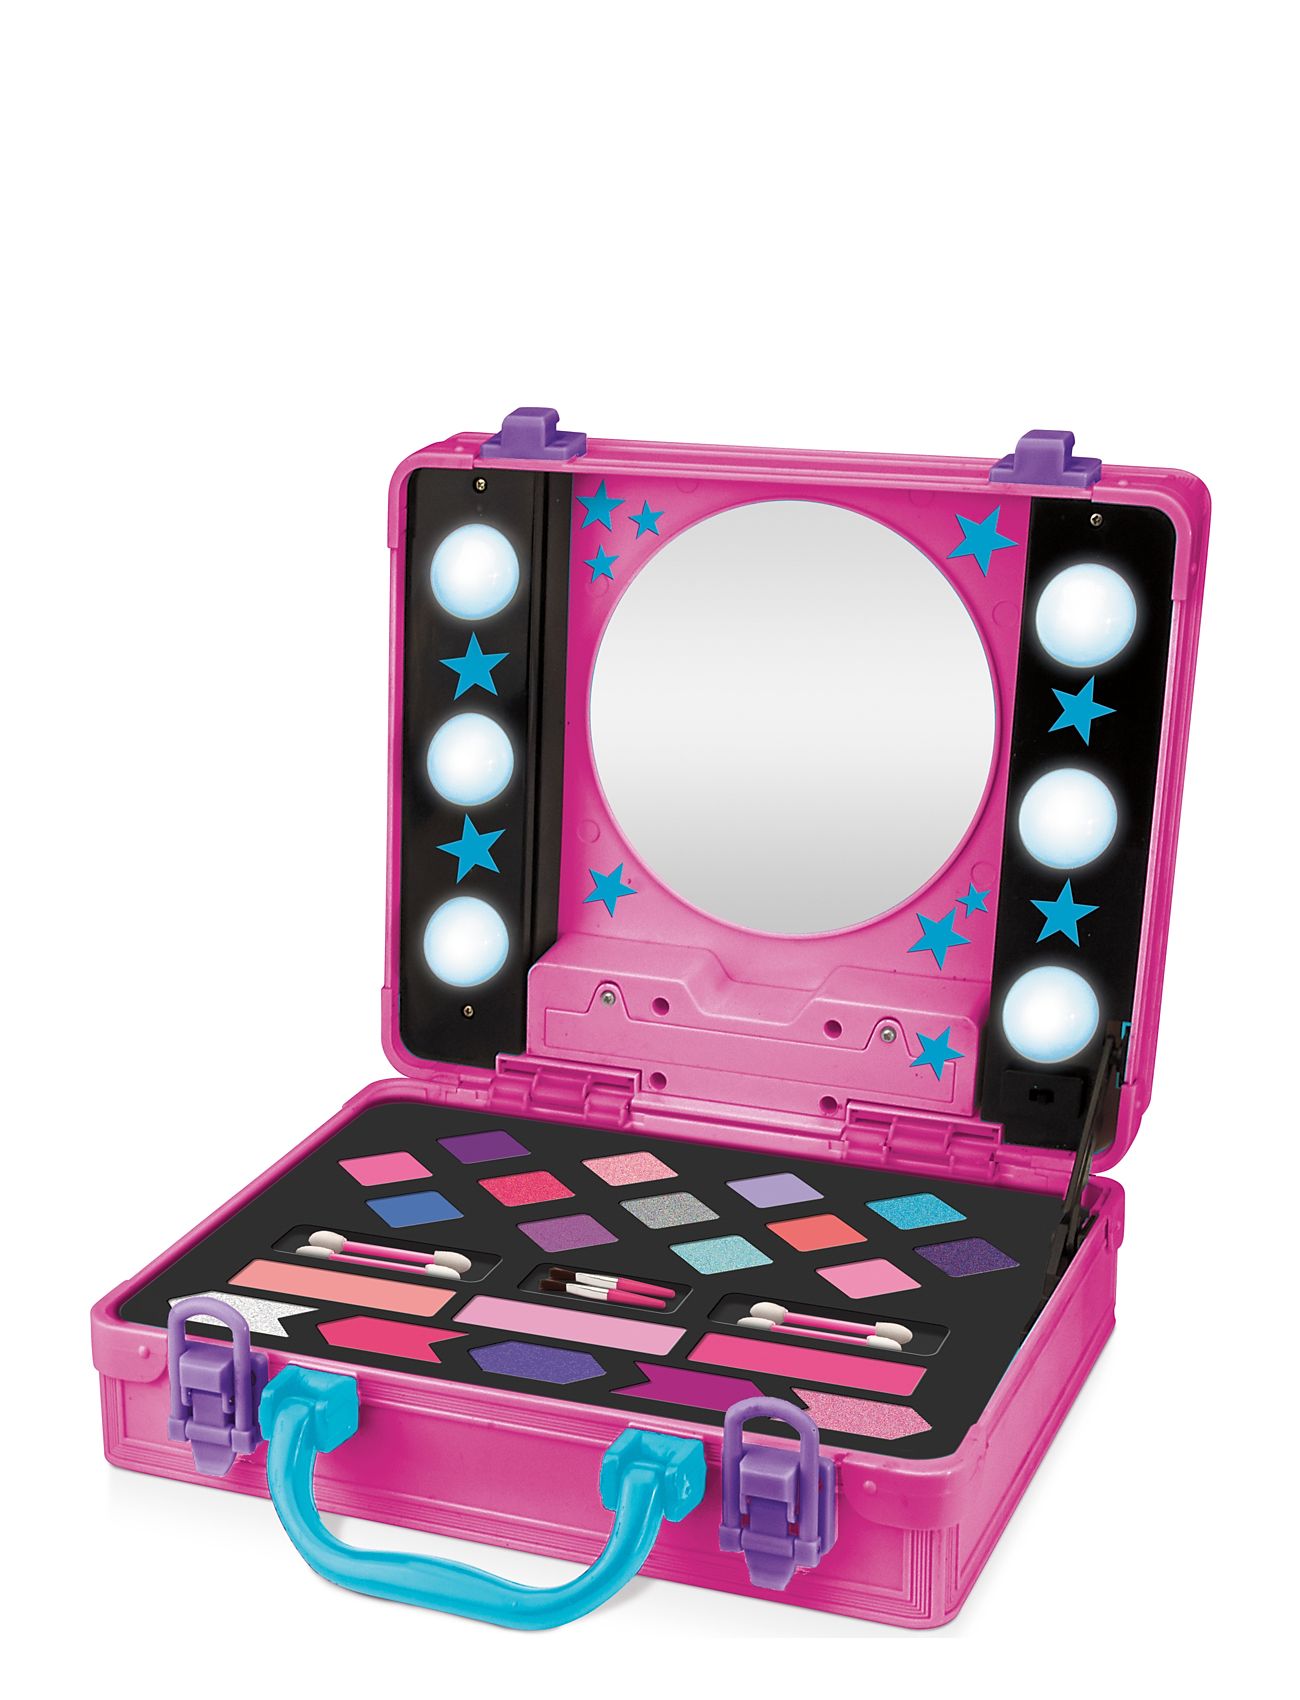 Shimmer N Sparkle Light Up Beauty Case Toys Costumes & Accessories Makeup Multi/patterned SHIMMER N SPARKLE